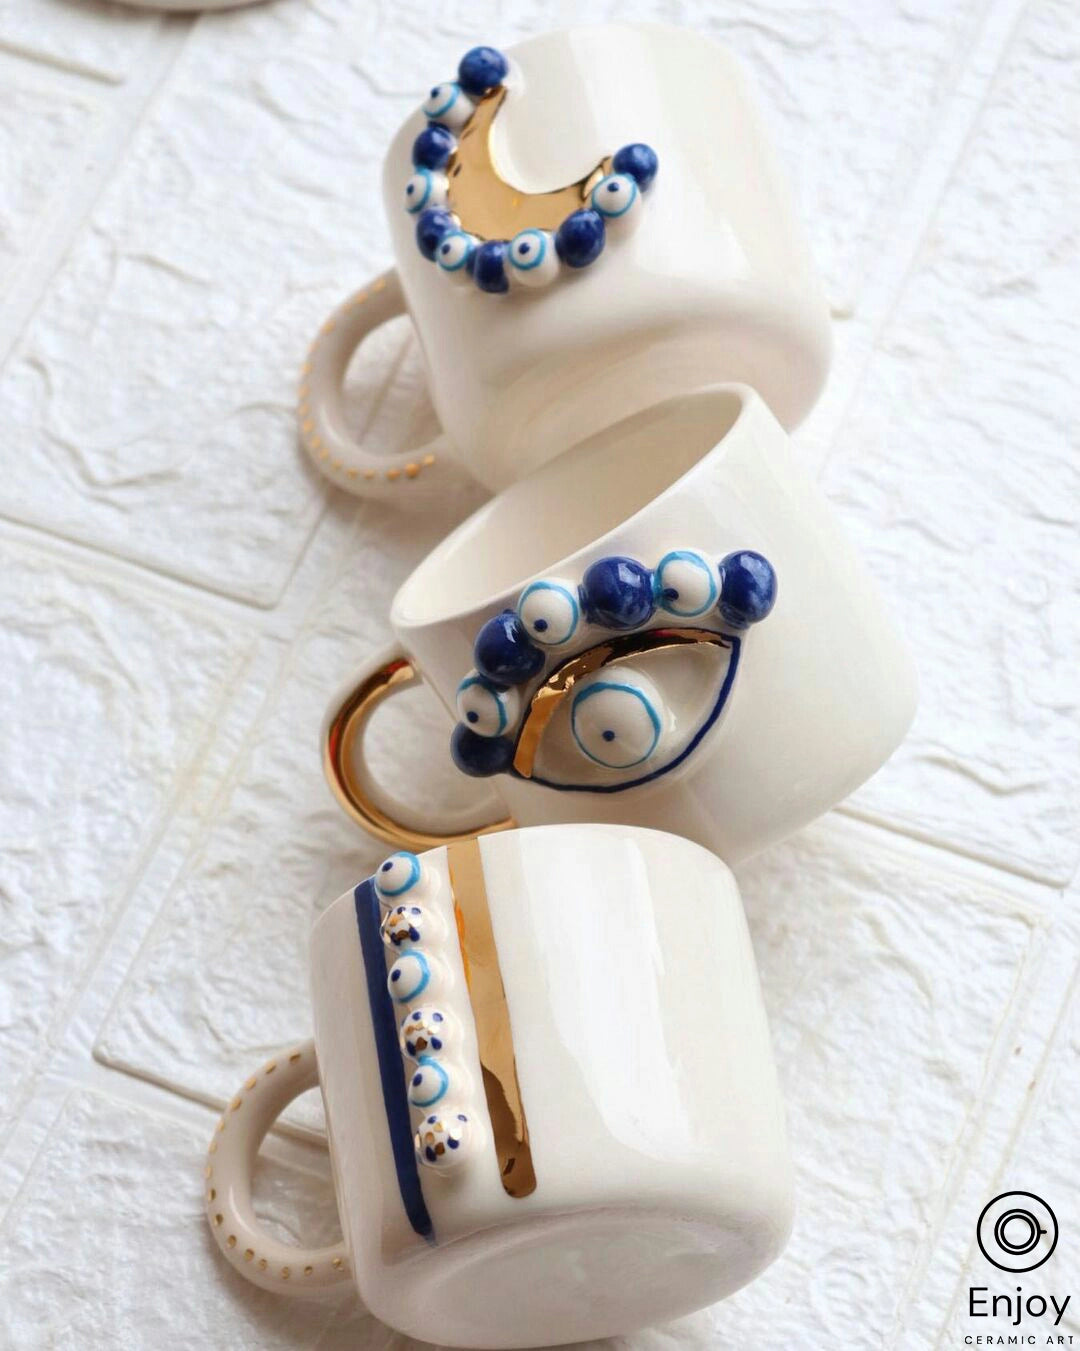 Three 'Blue Moon' ceramic mugs with gold handles and blue evil eye designs, artfully arranged on a textured white surface, showcasing the mugs' decorative elements.